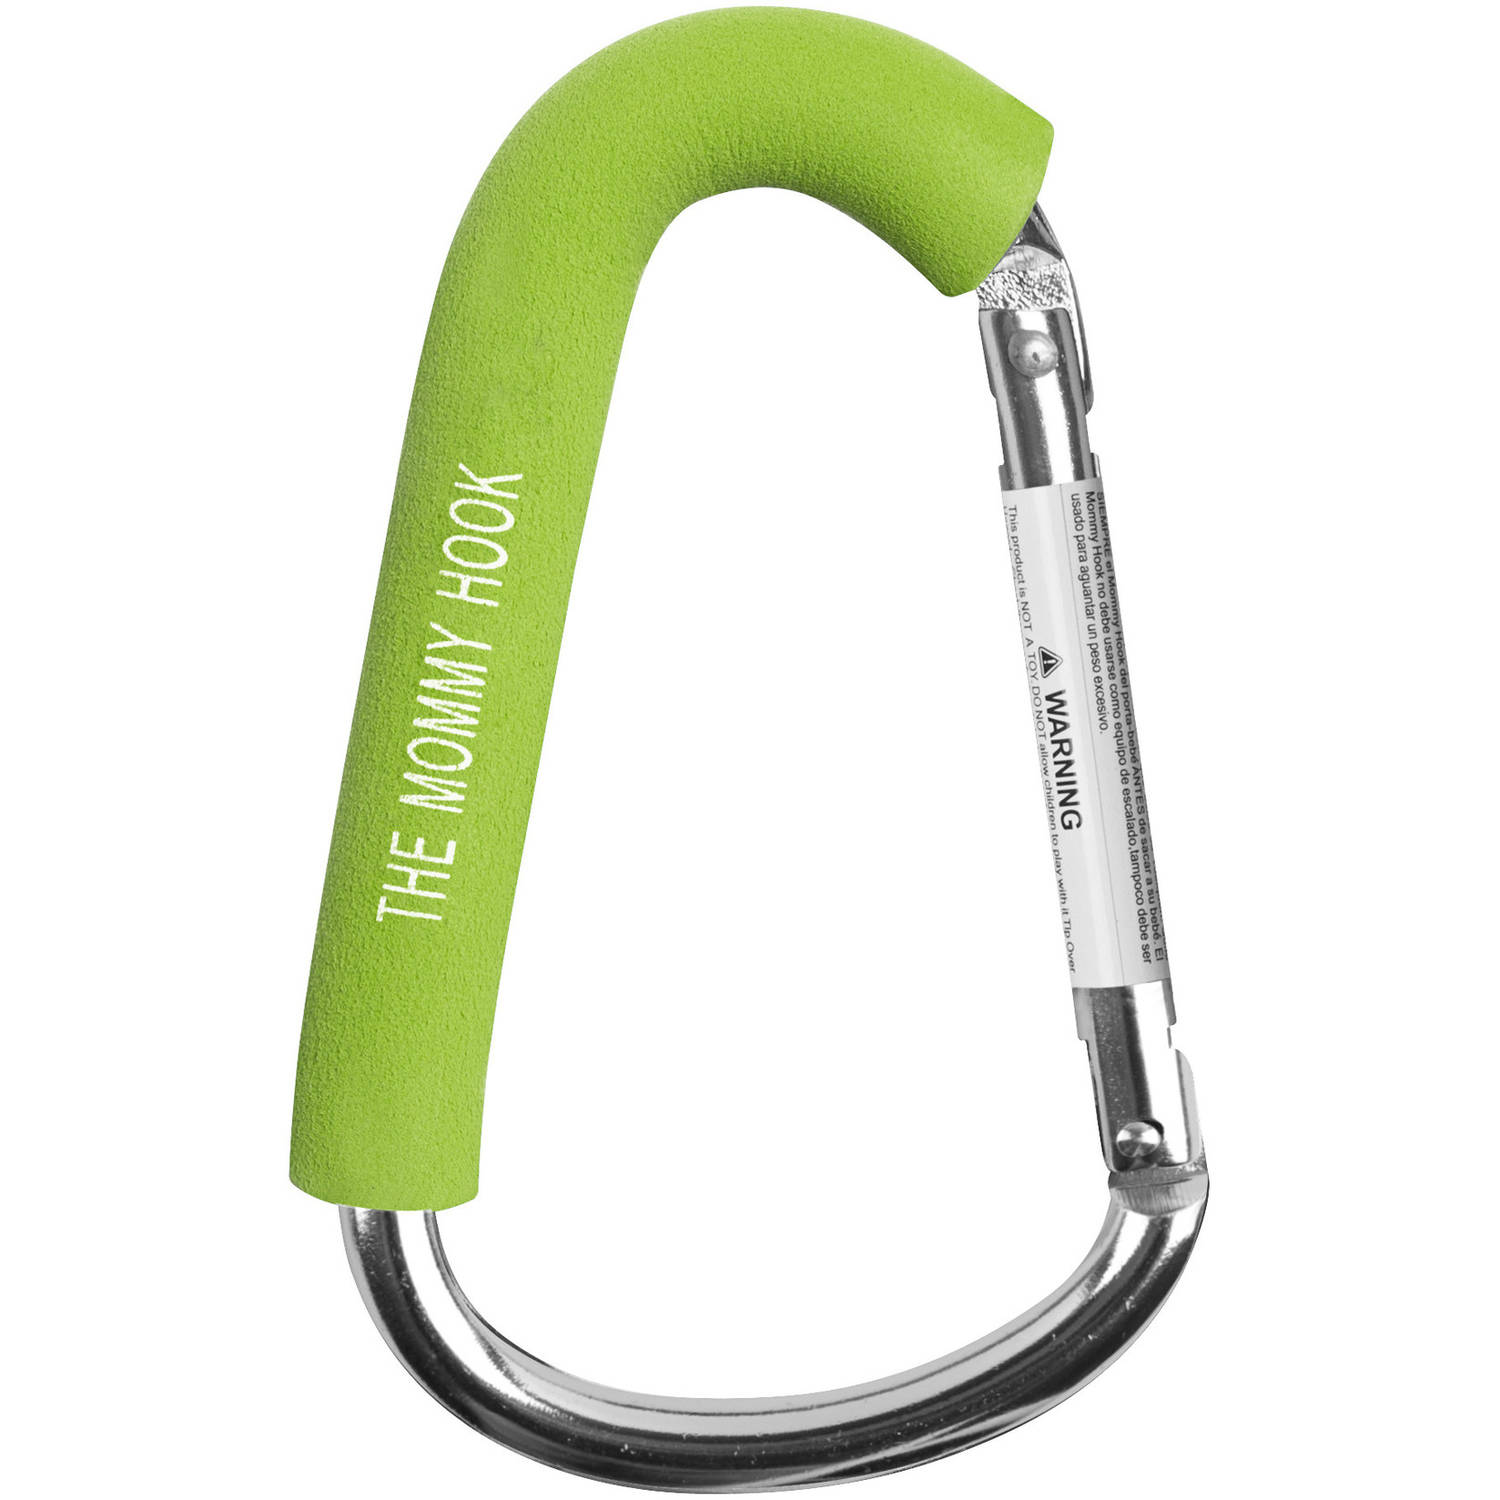 The Mommy Hook Stroller Accessory Lime - image 1 of 5